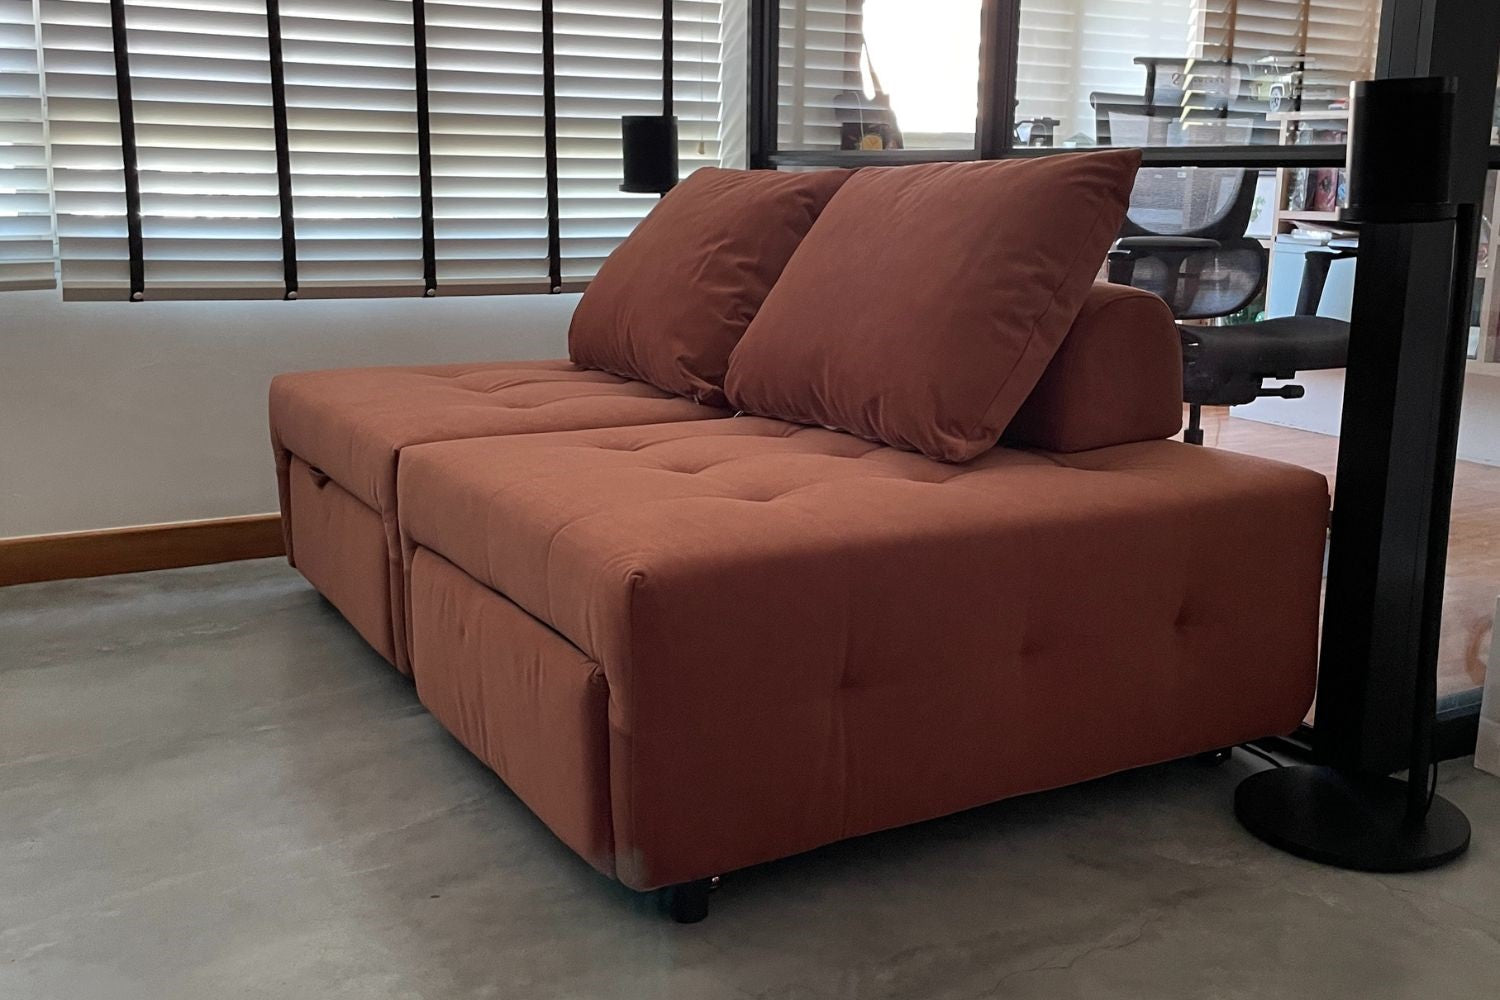 Candy two 85cm orange pet friendly fabric sofa bed